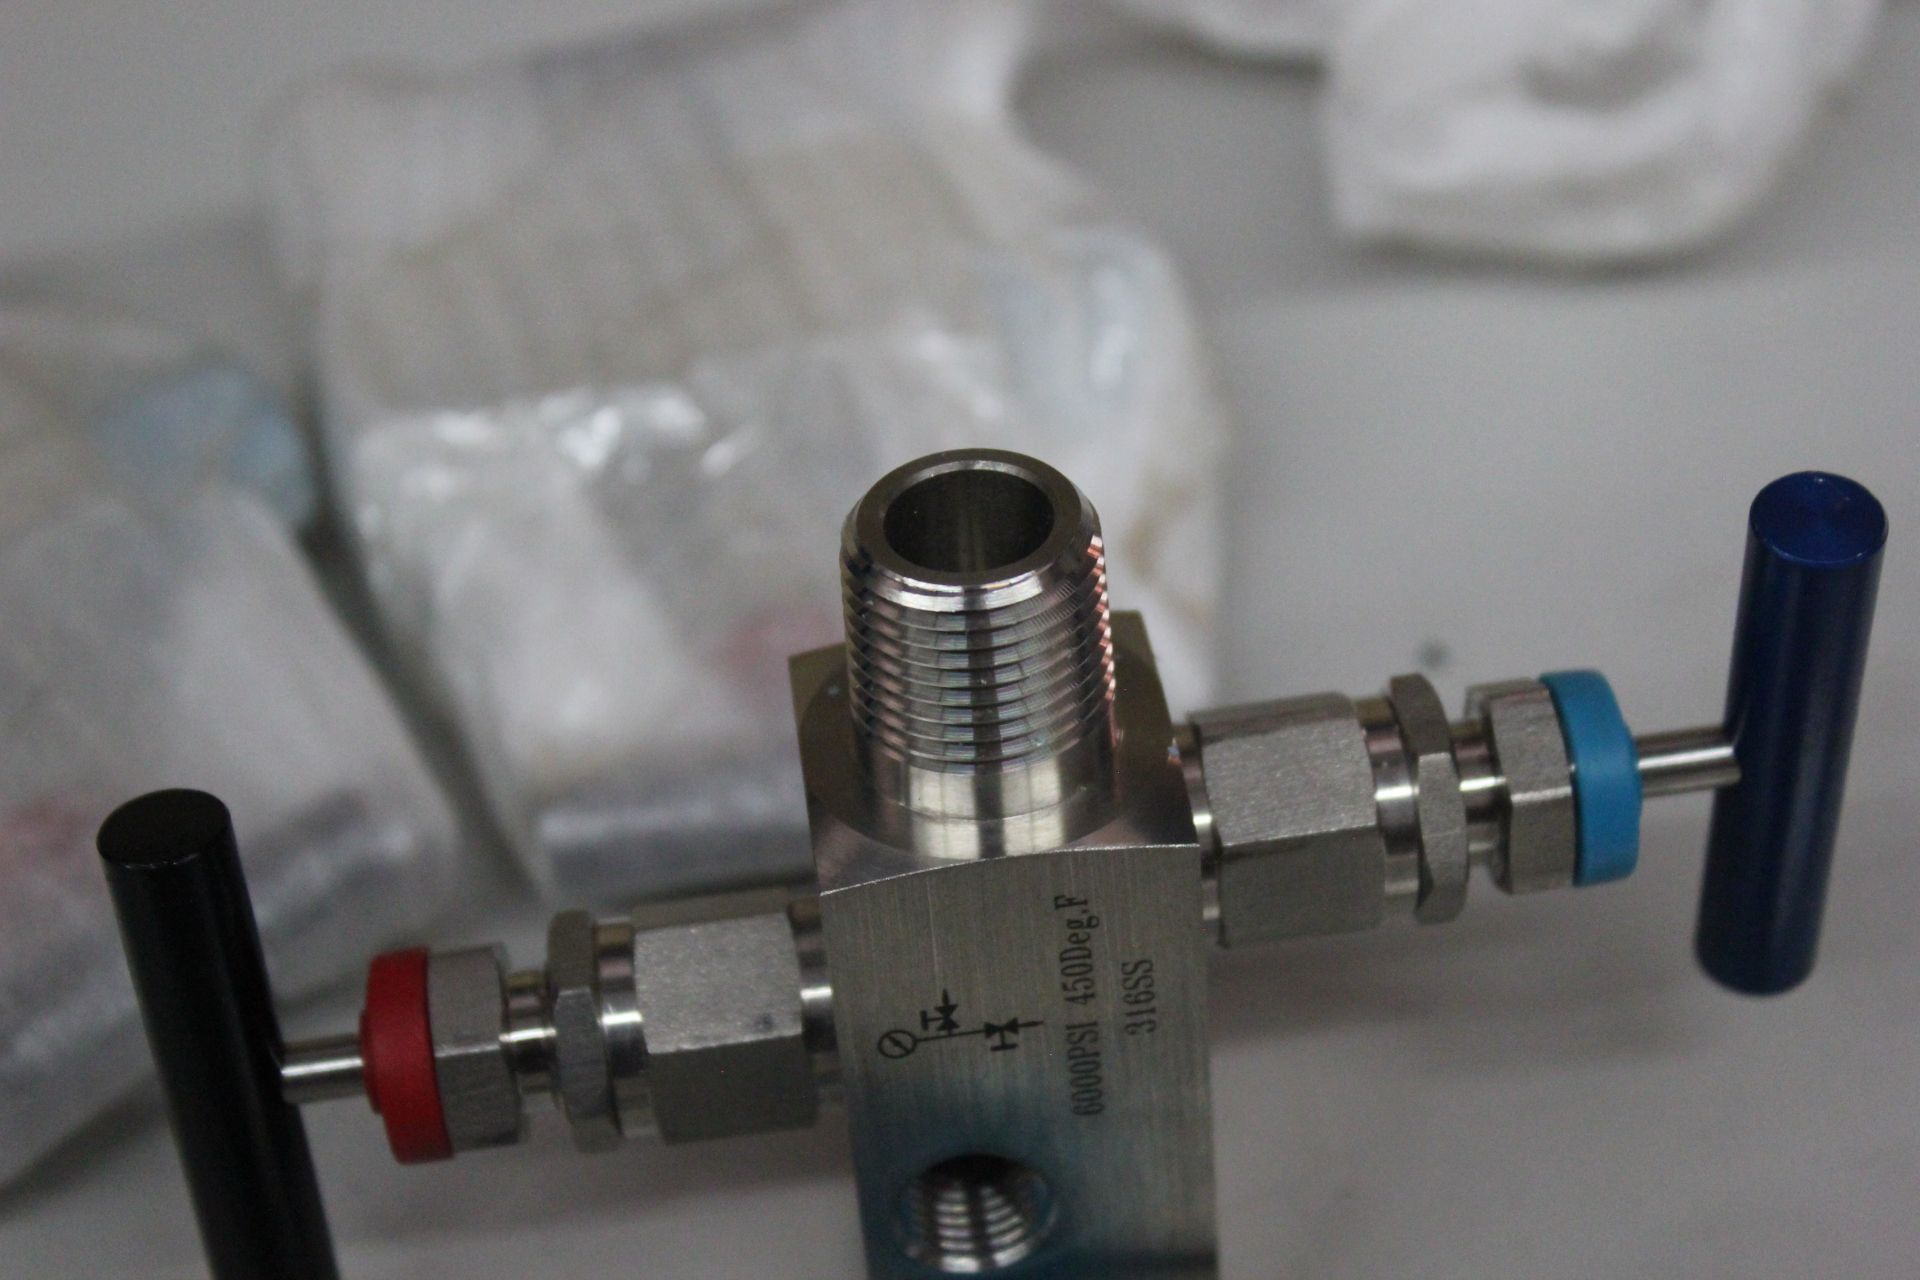 LOT OF NEW SS HIGH PRESSURE BLOCK & BLEED VALVES - Image 6 of 8